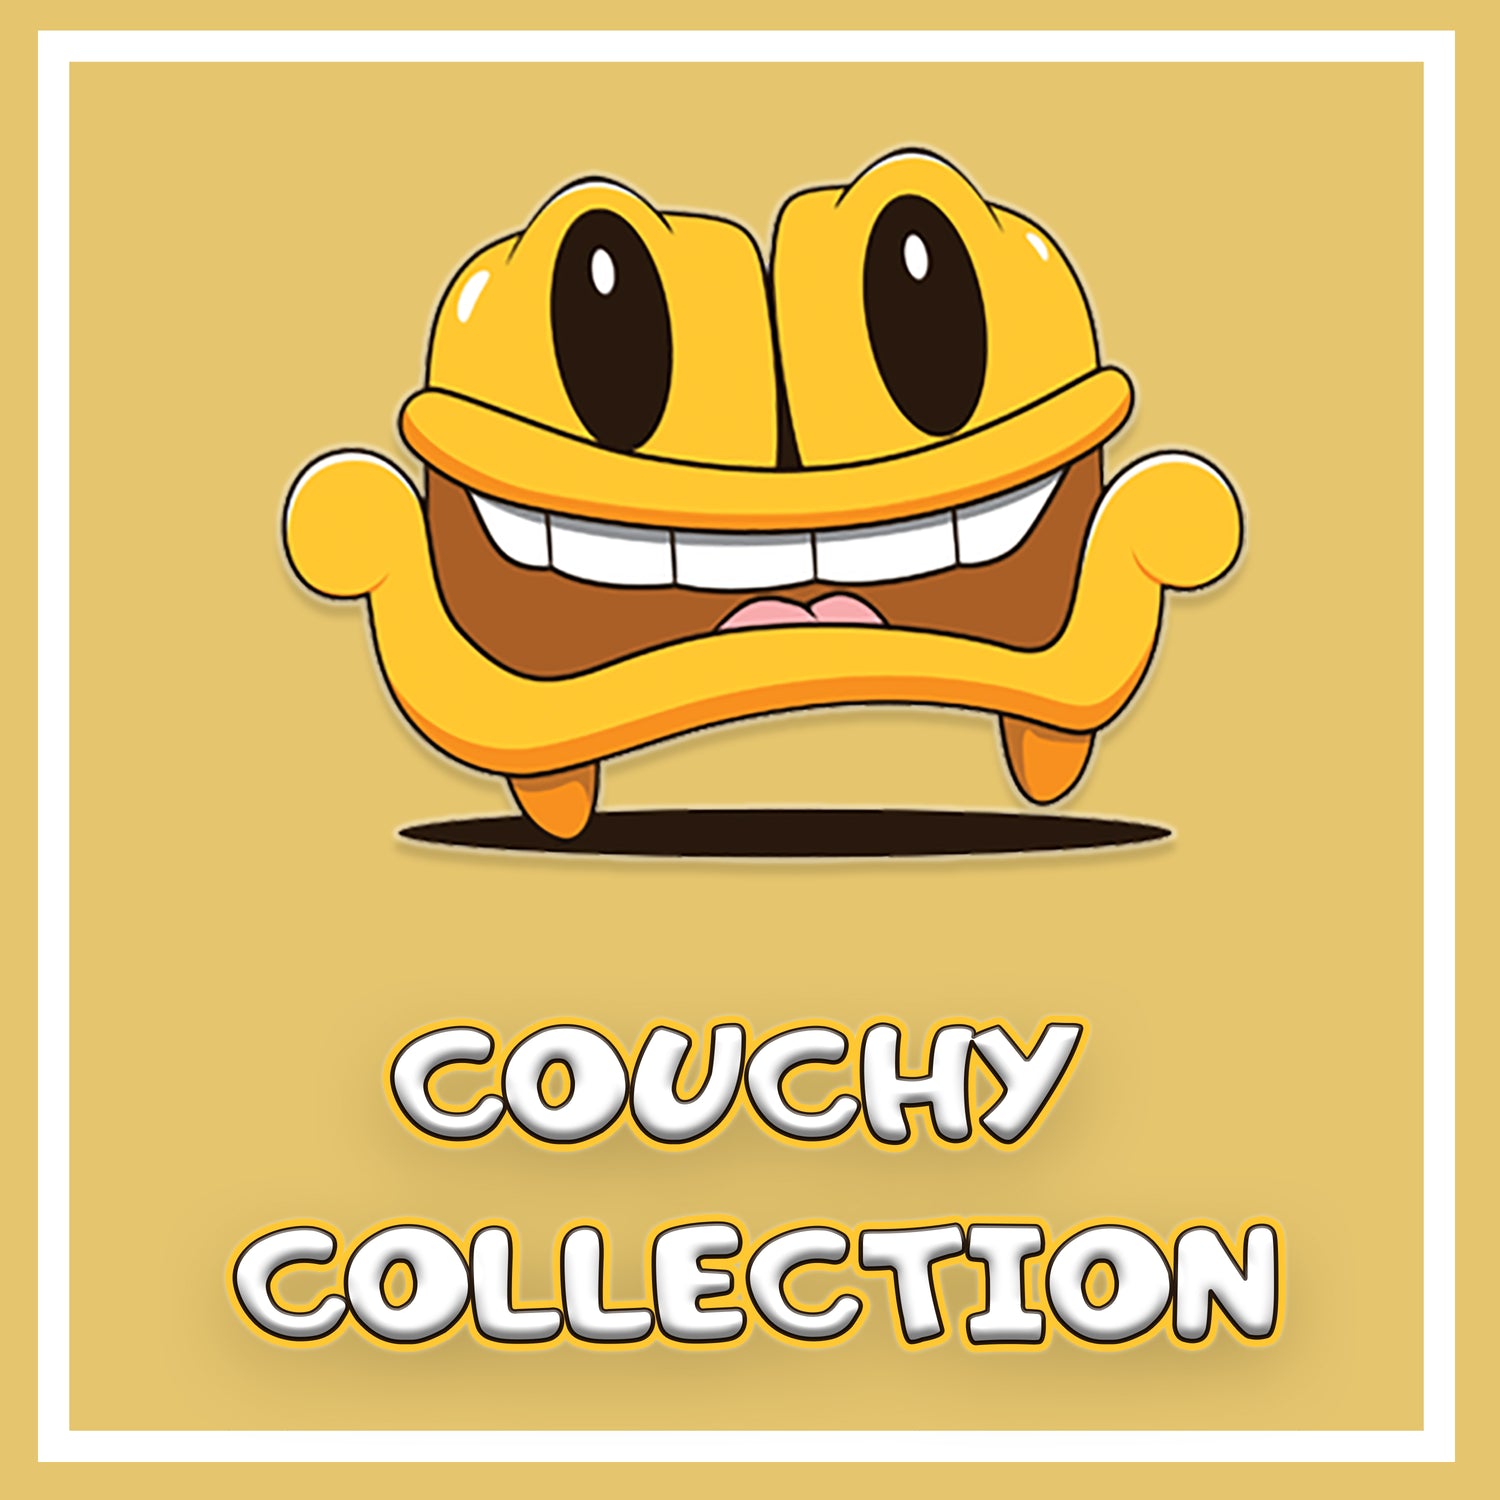 Couchy Collection